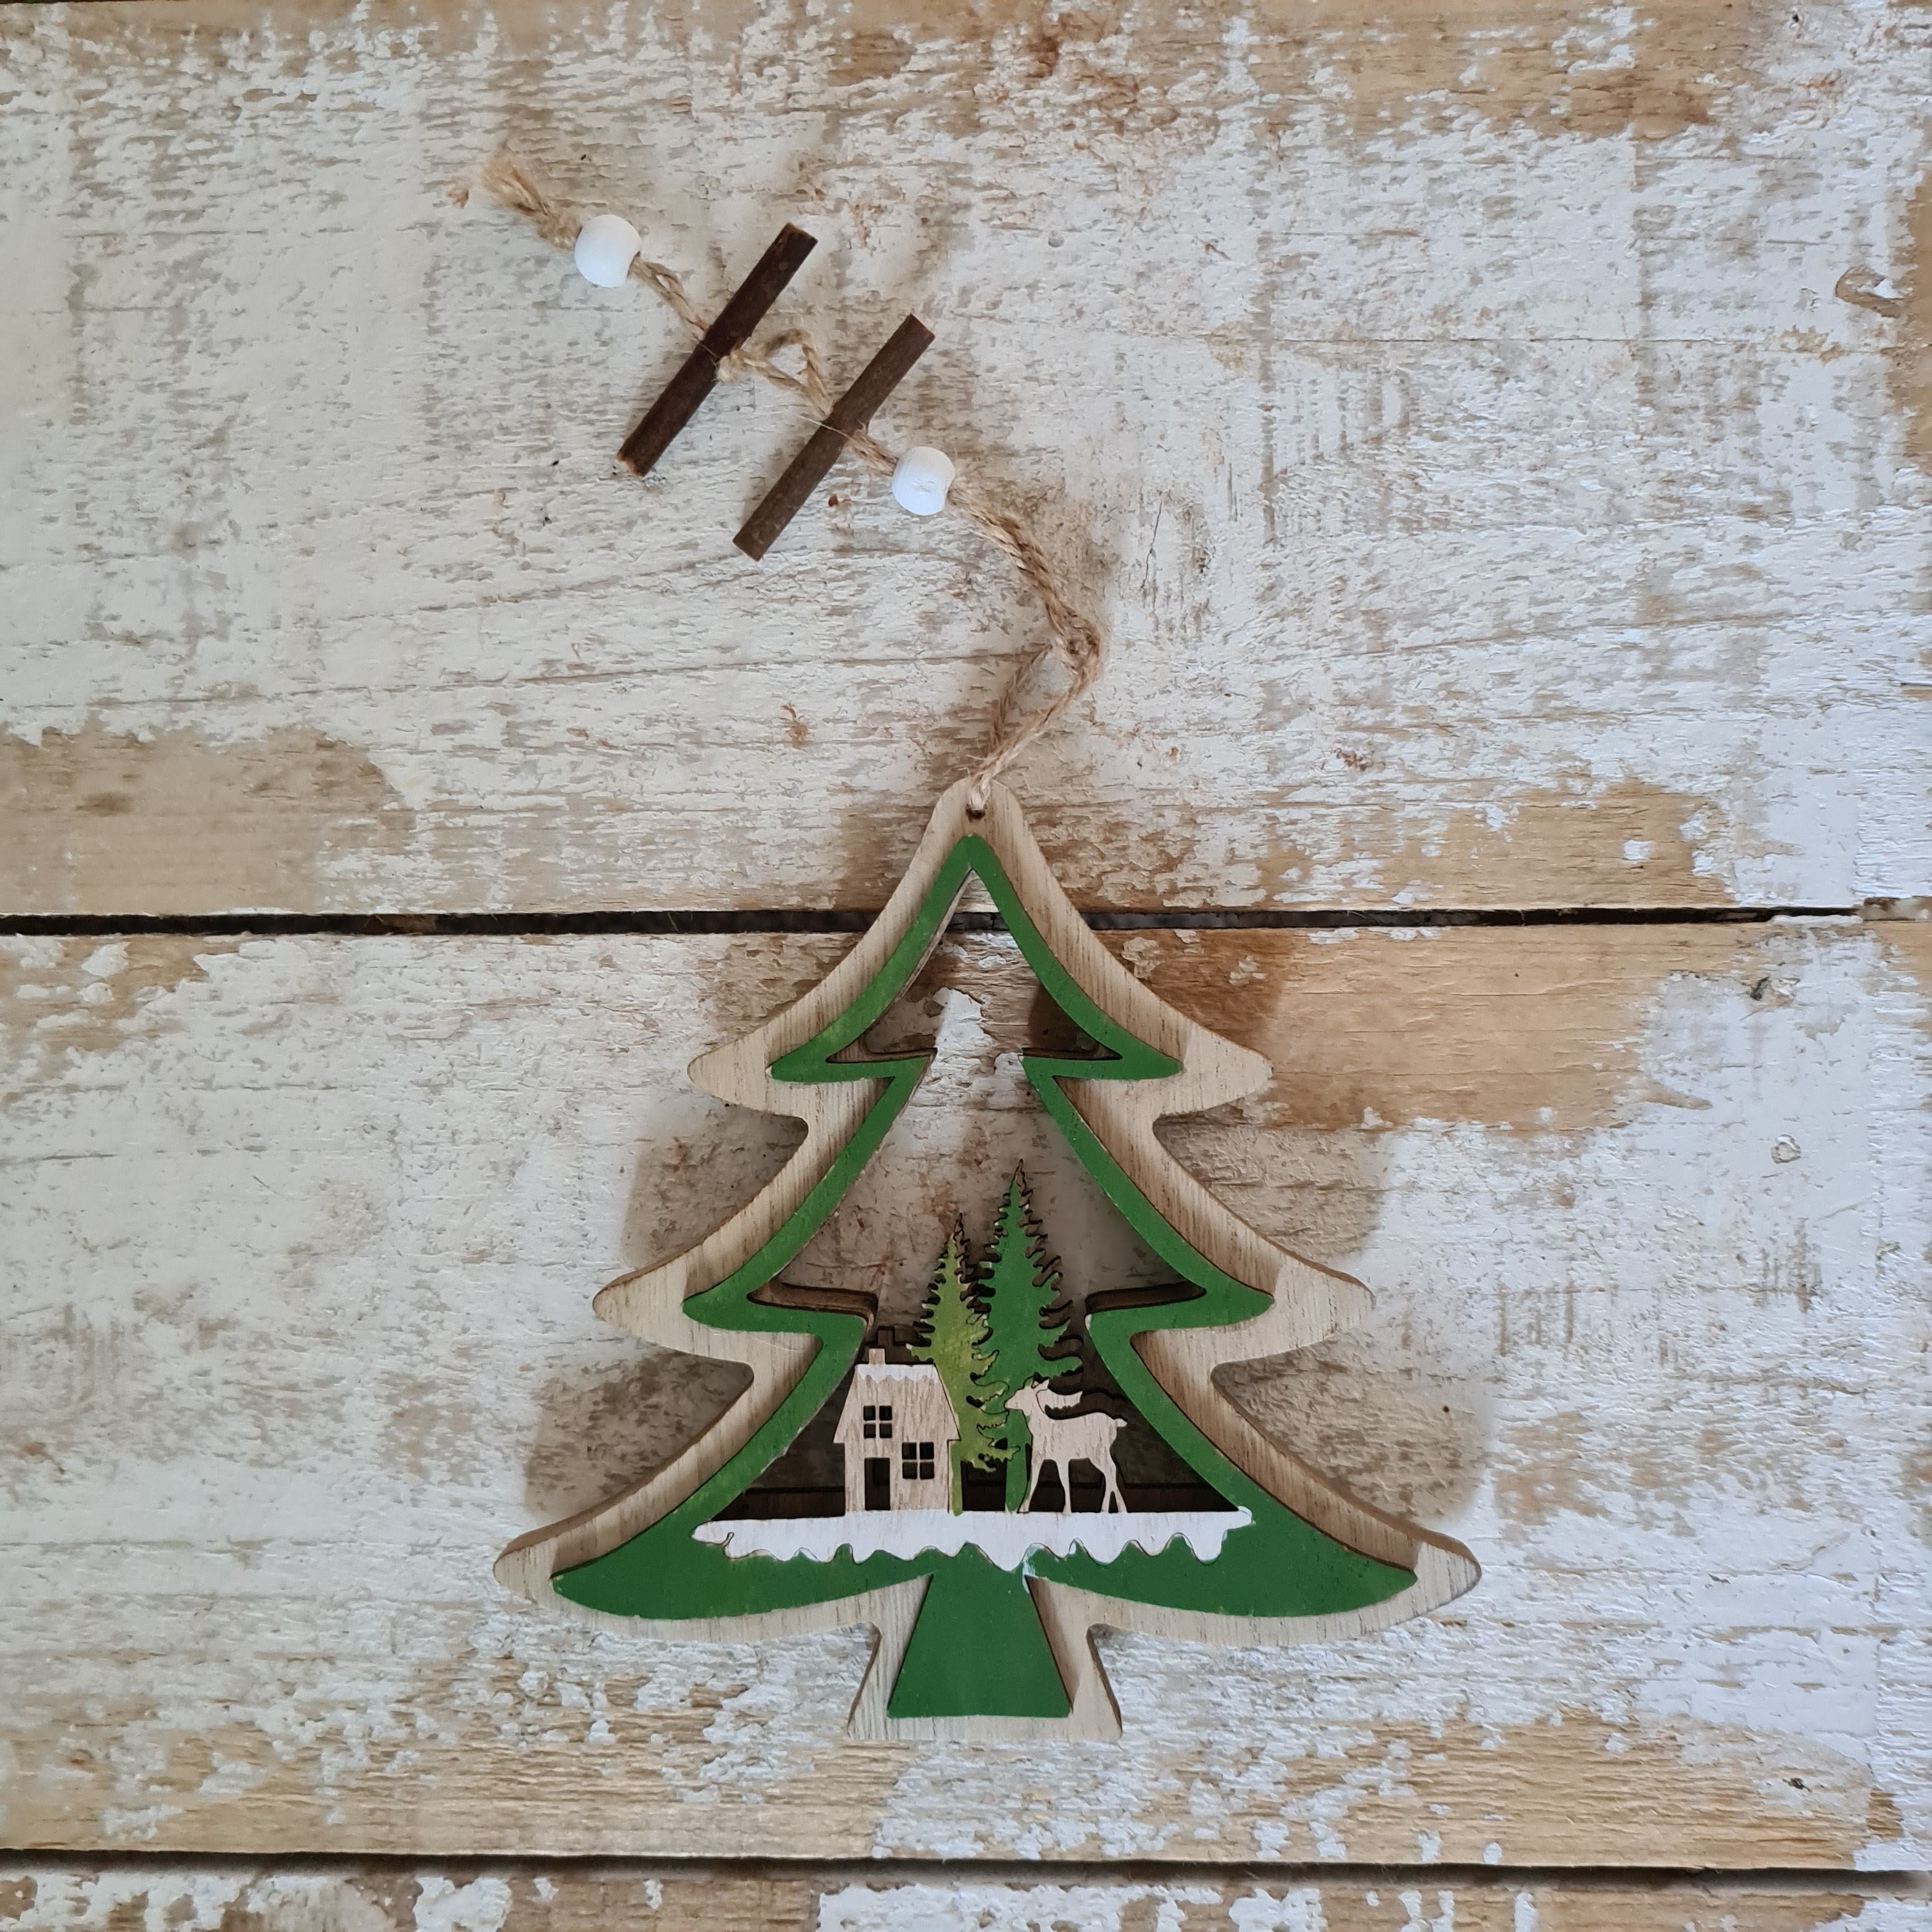 Large 3D Wood Christmas Tree Ornament with Hand-painted Winter Wonderland Scene